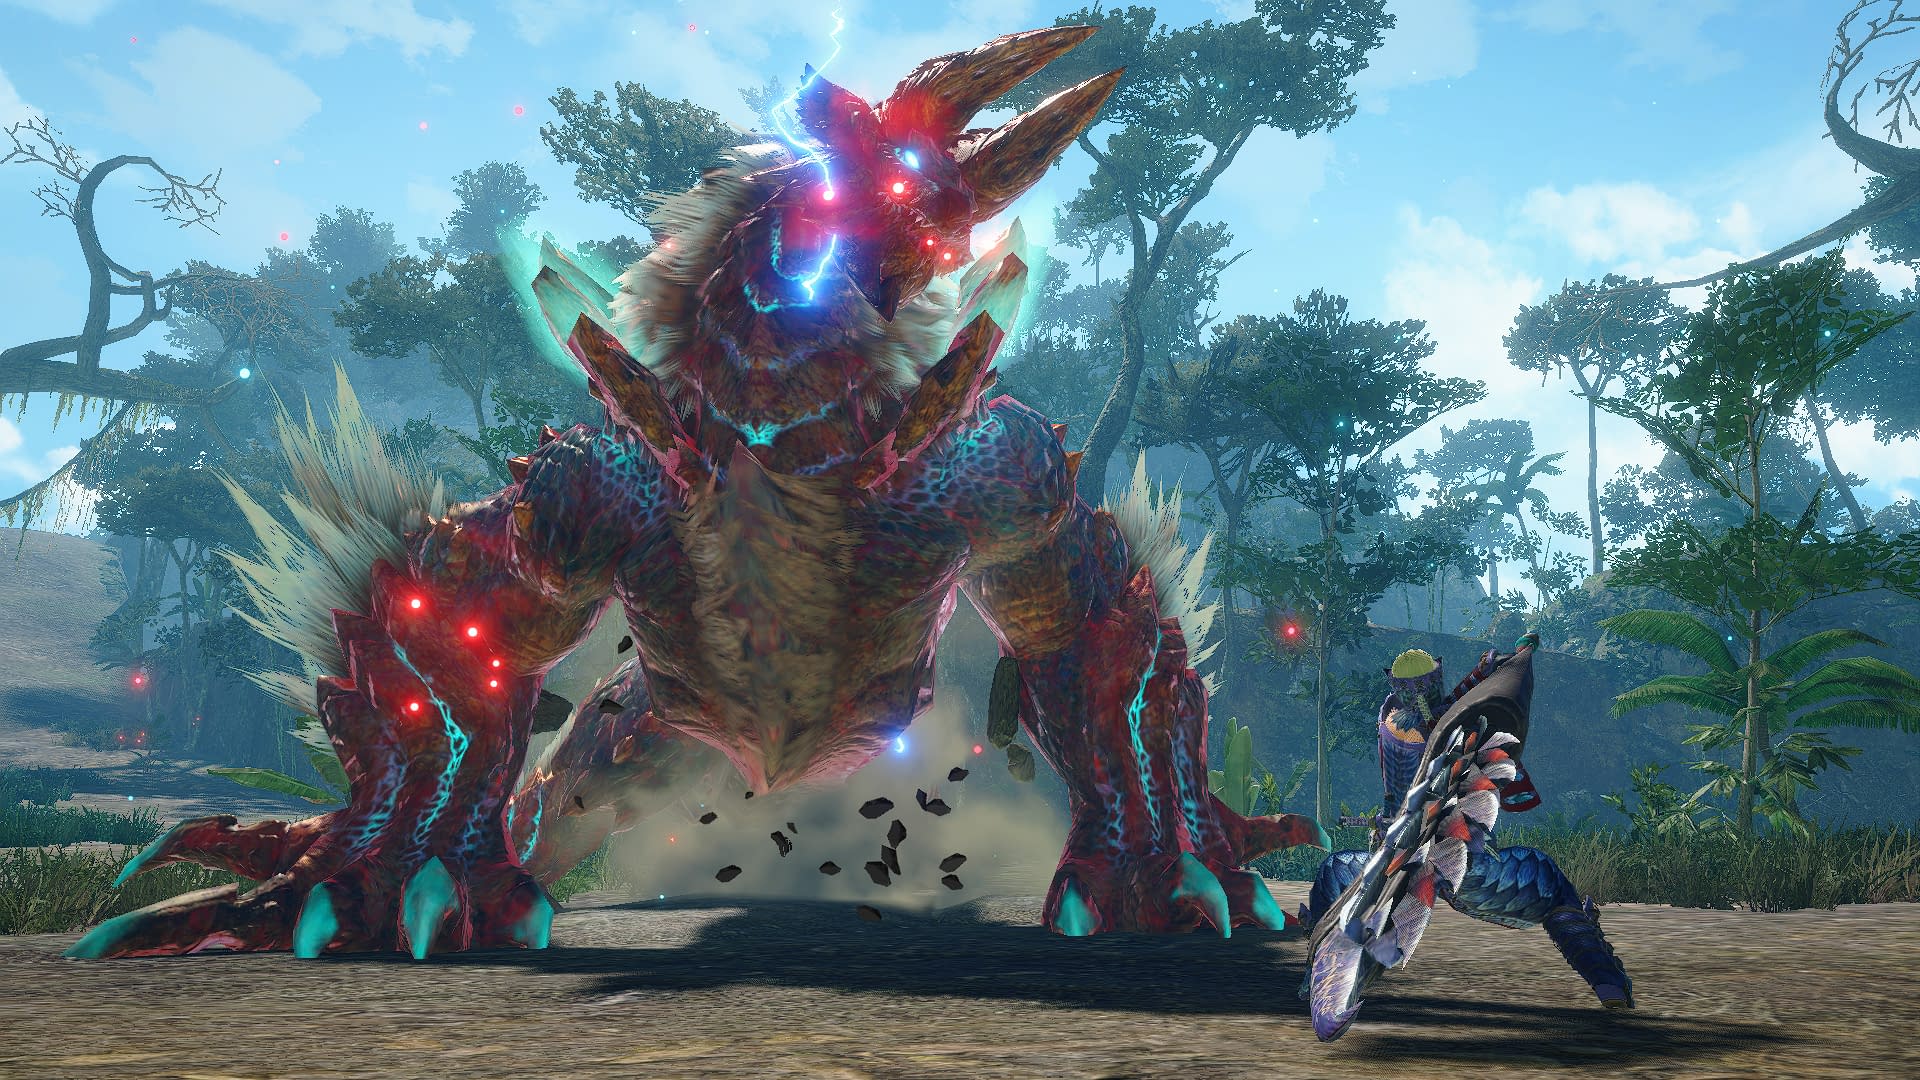 Monster Hunter Rise Takes Exploration Even Further Than Monster